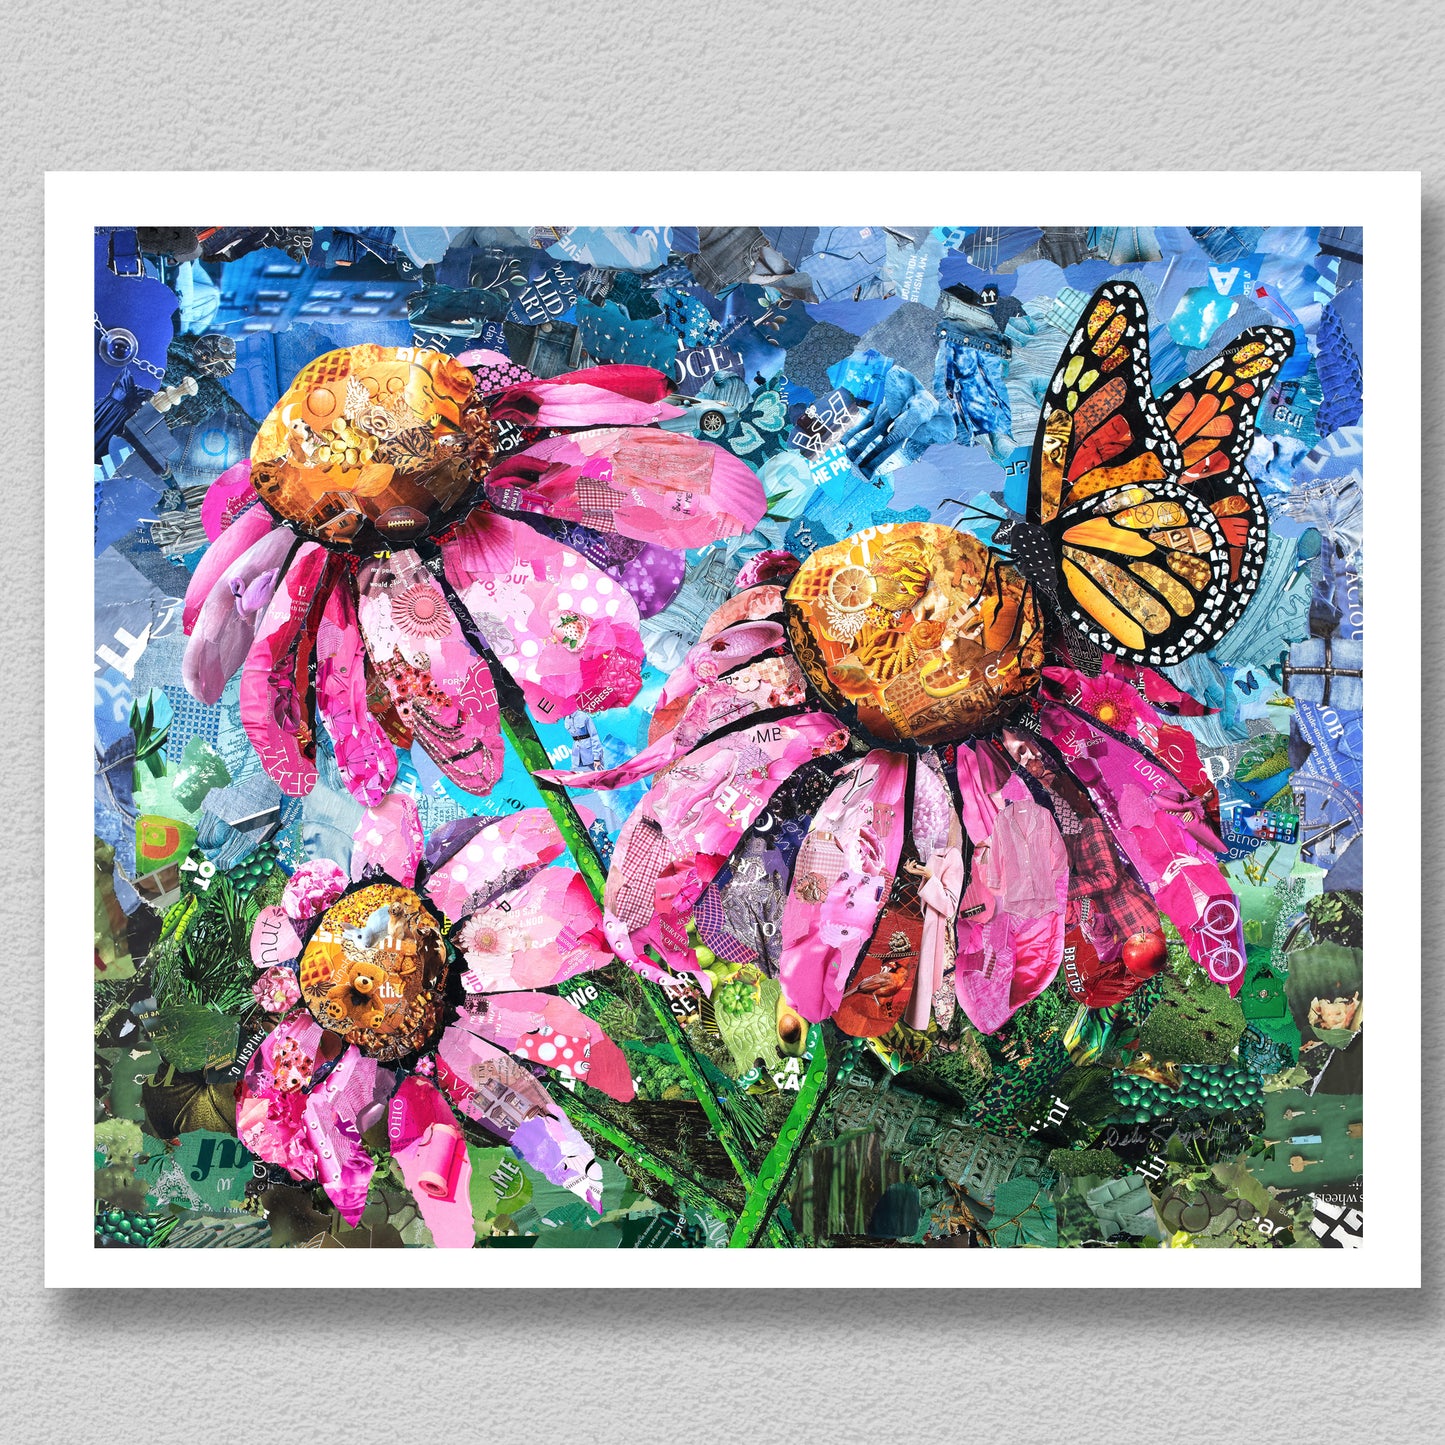 "Summer in Ohio" - Coneflowers and a butterfly